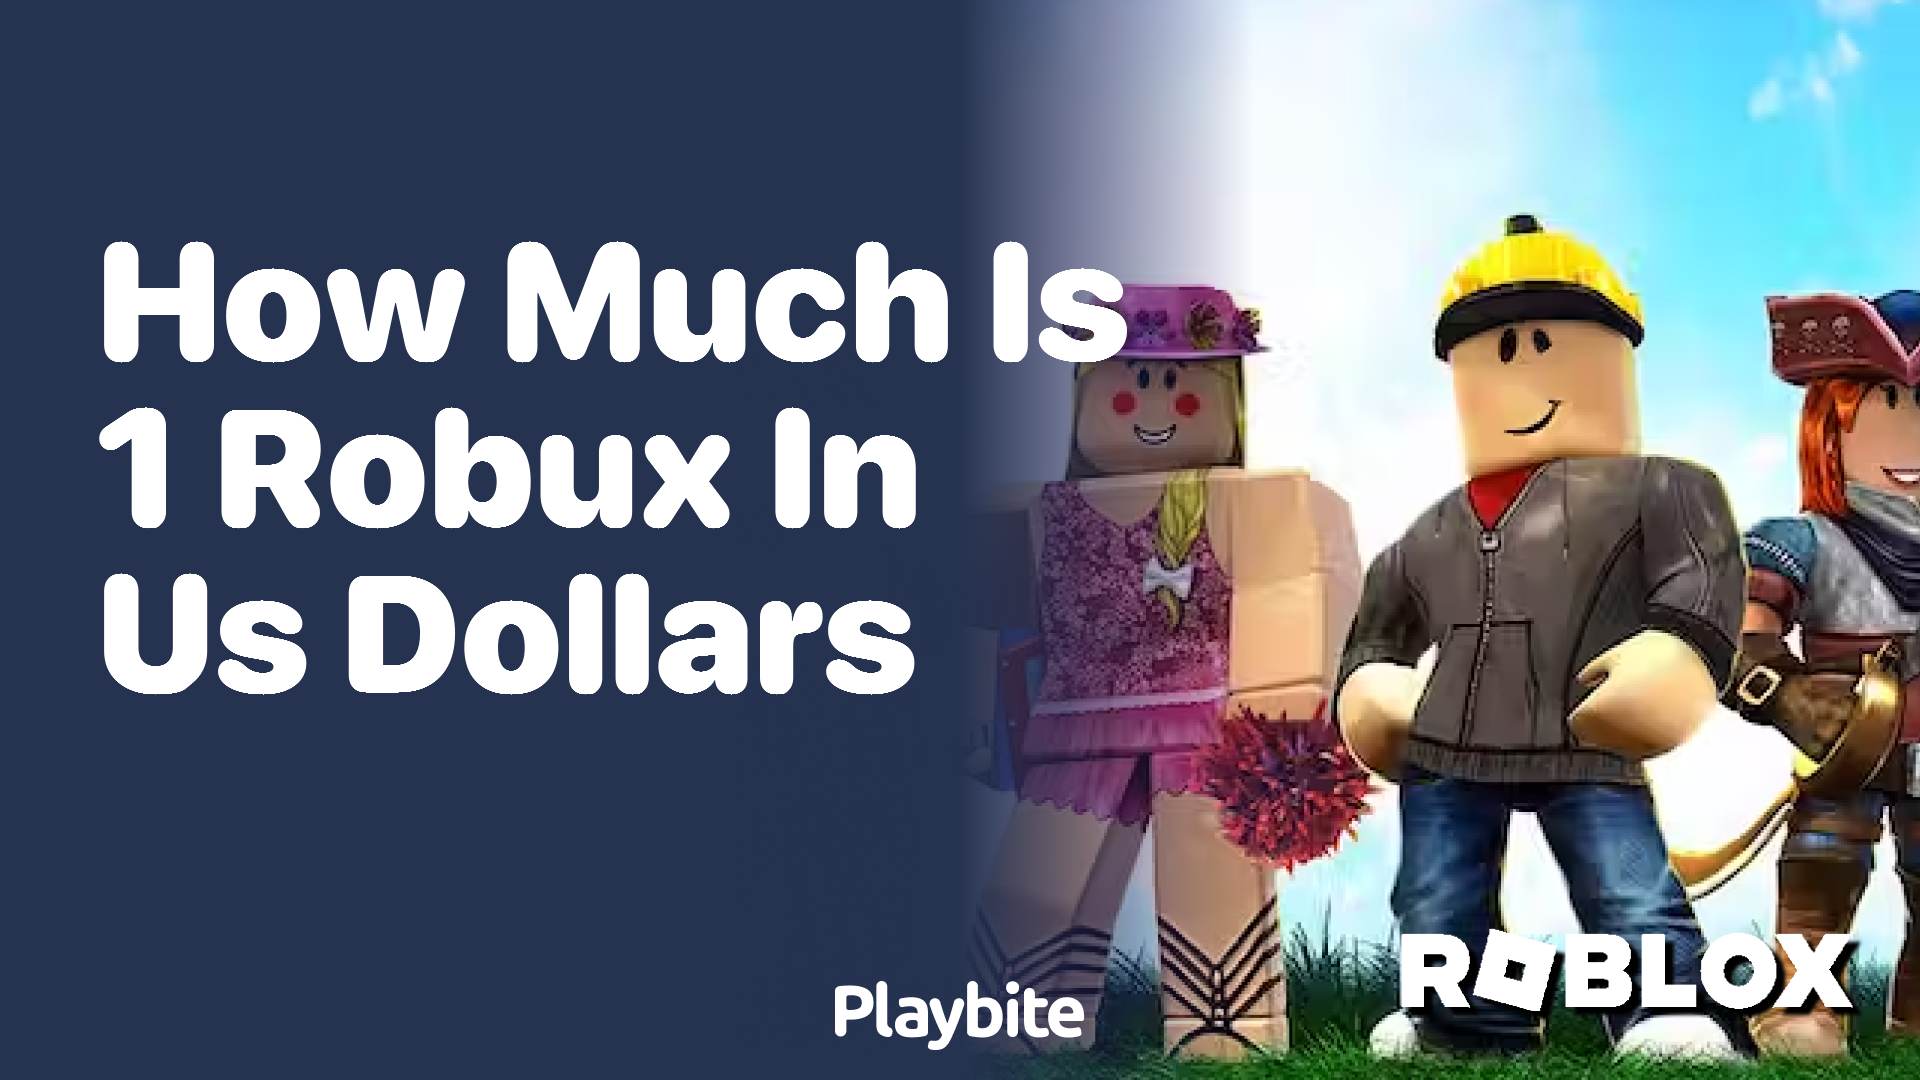 How Much is 1 Robux in US Dollars?